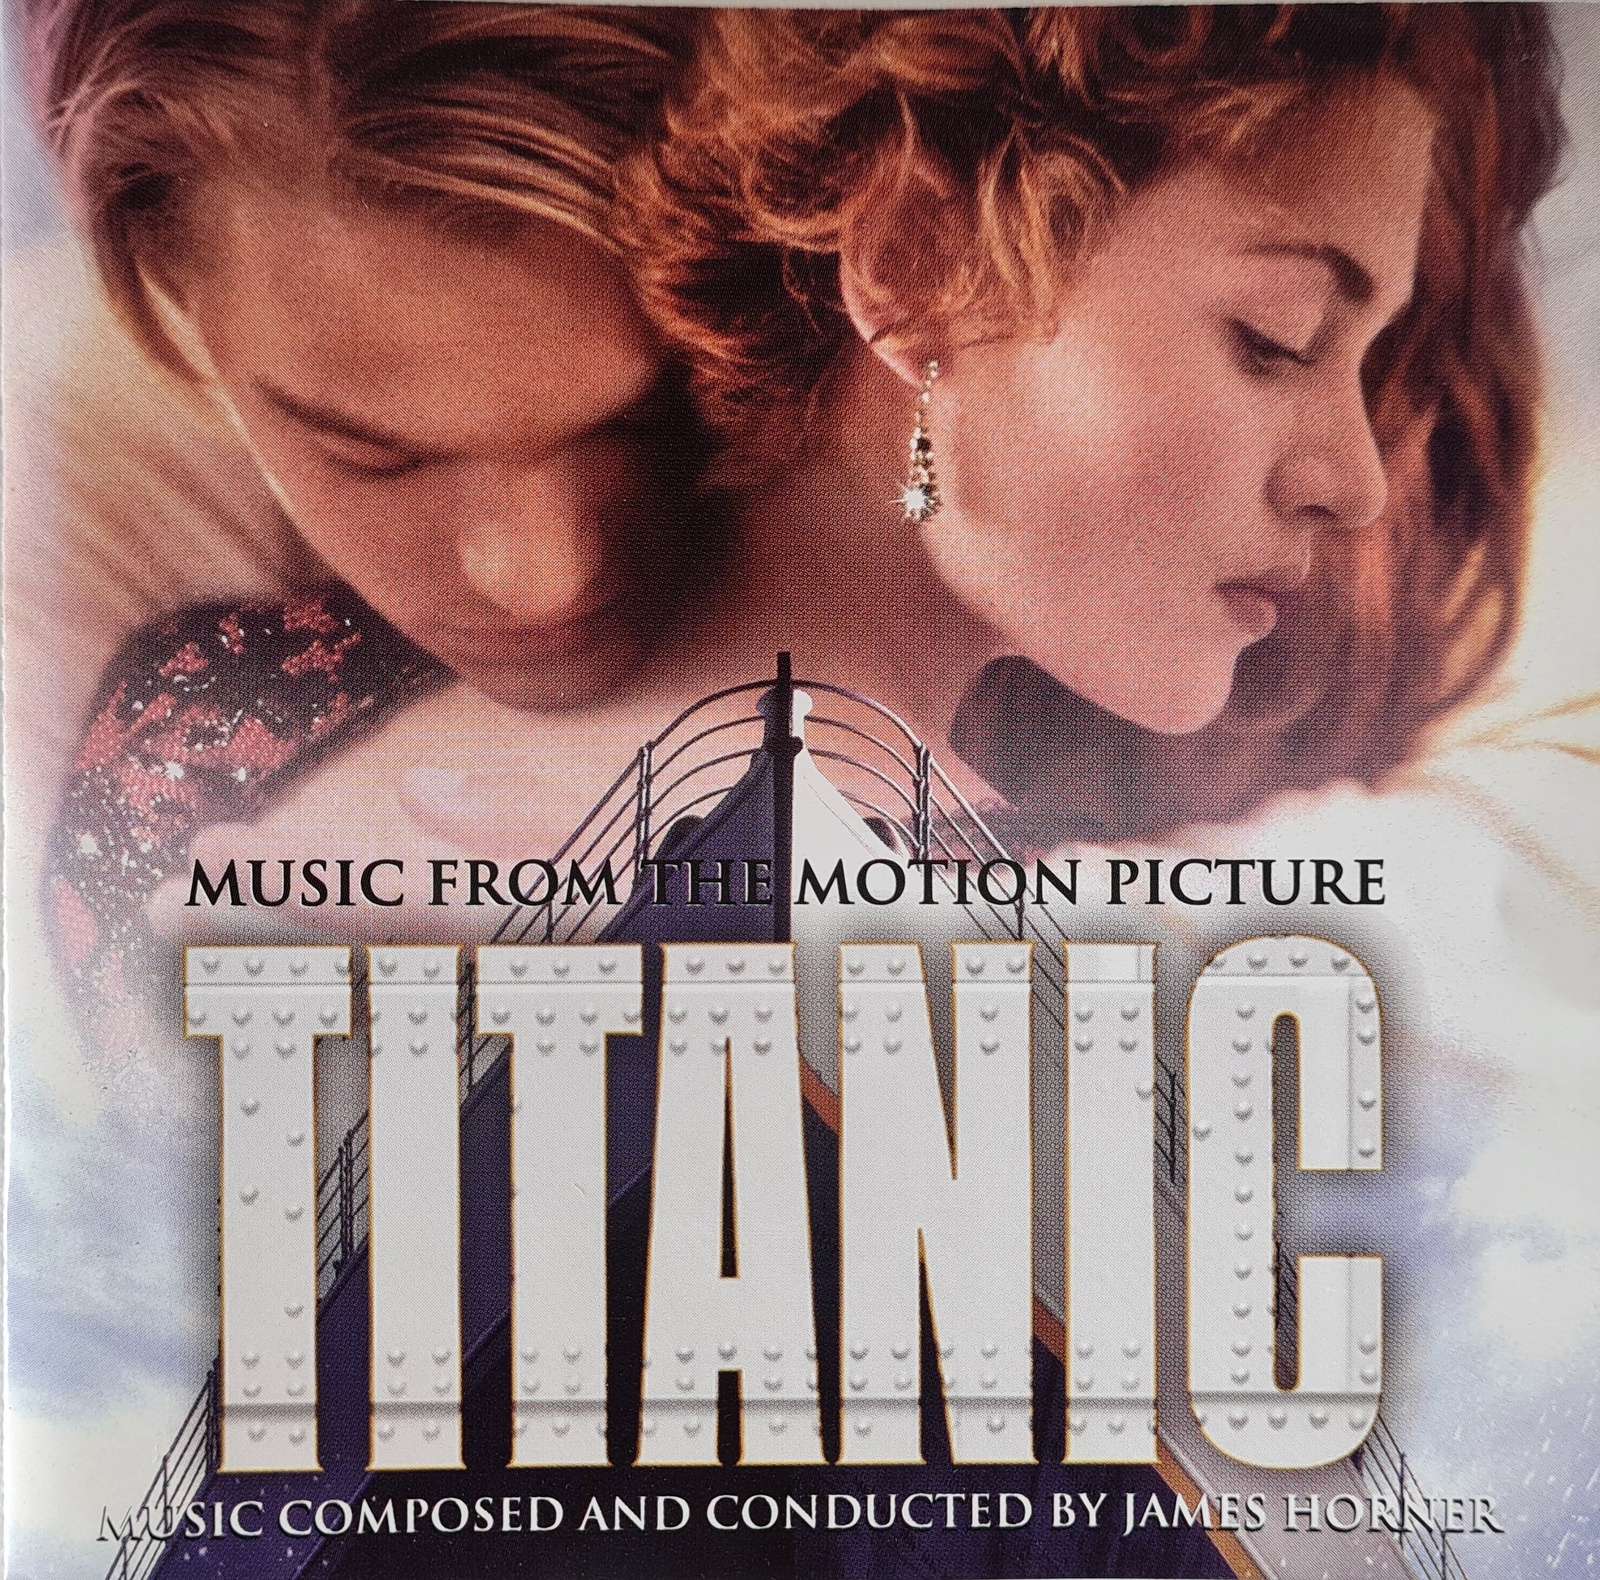 Titanic - Music from the Motion Picture - James Horner (CD)